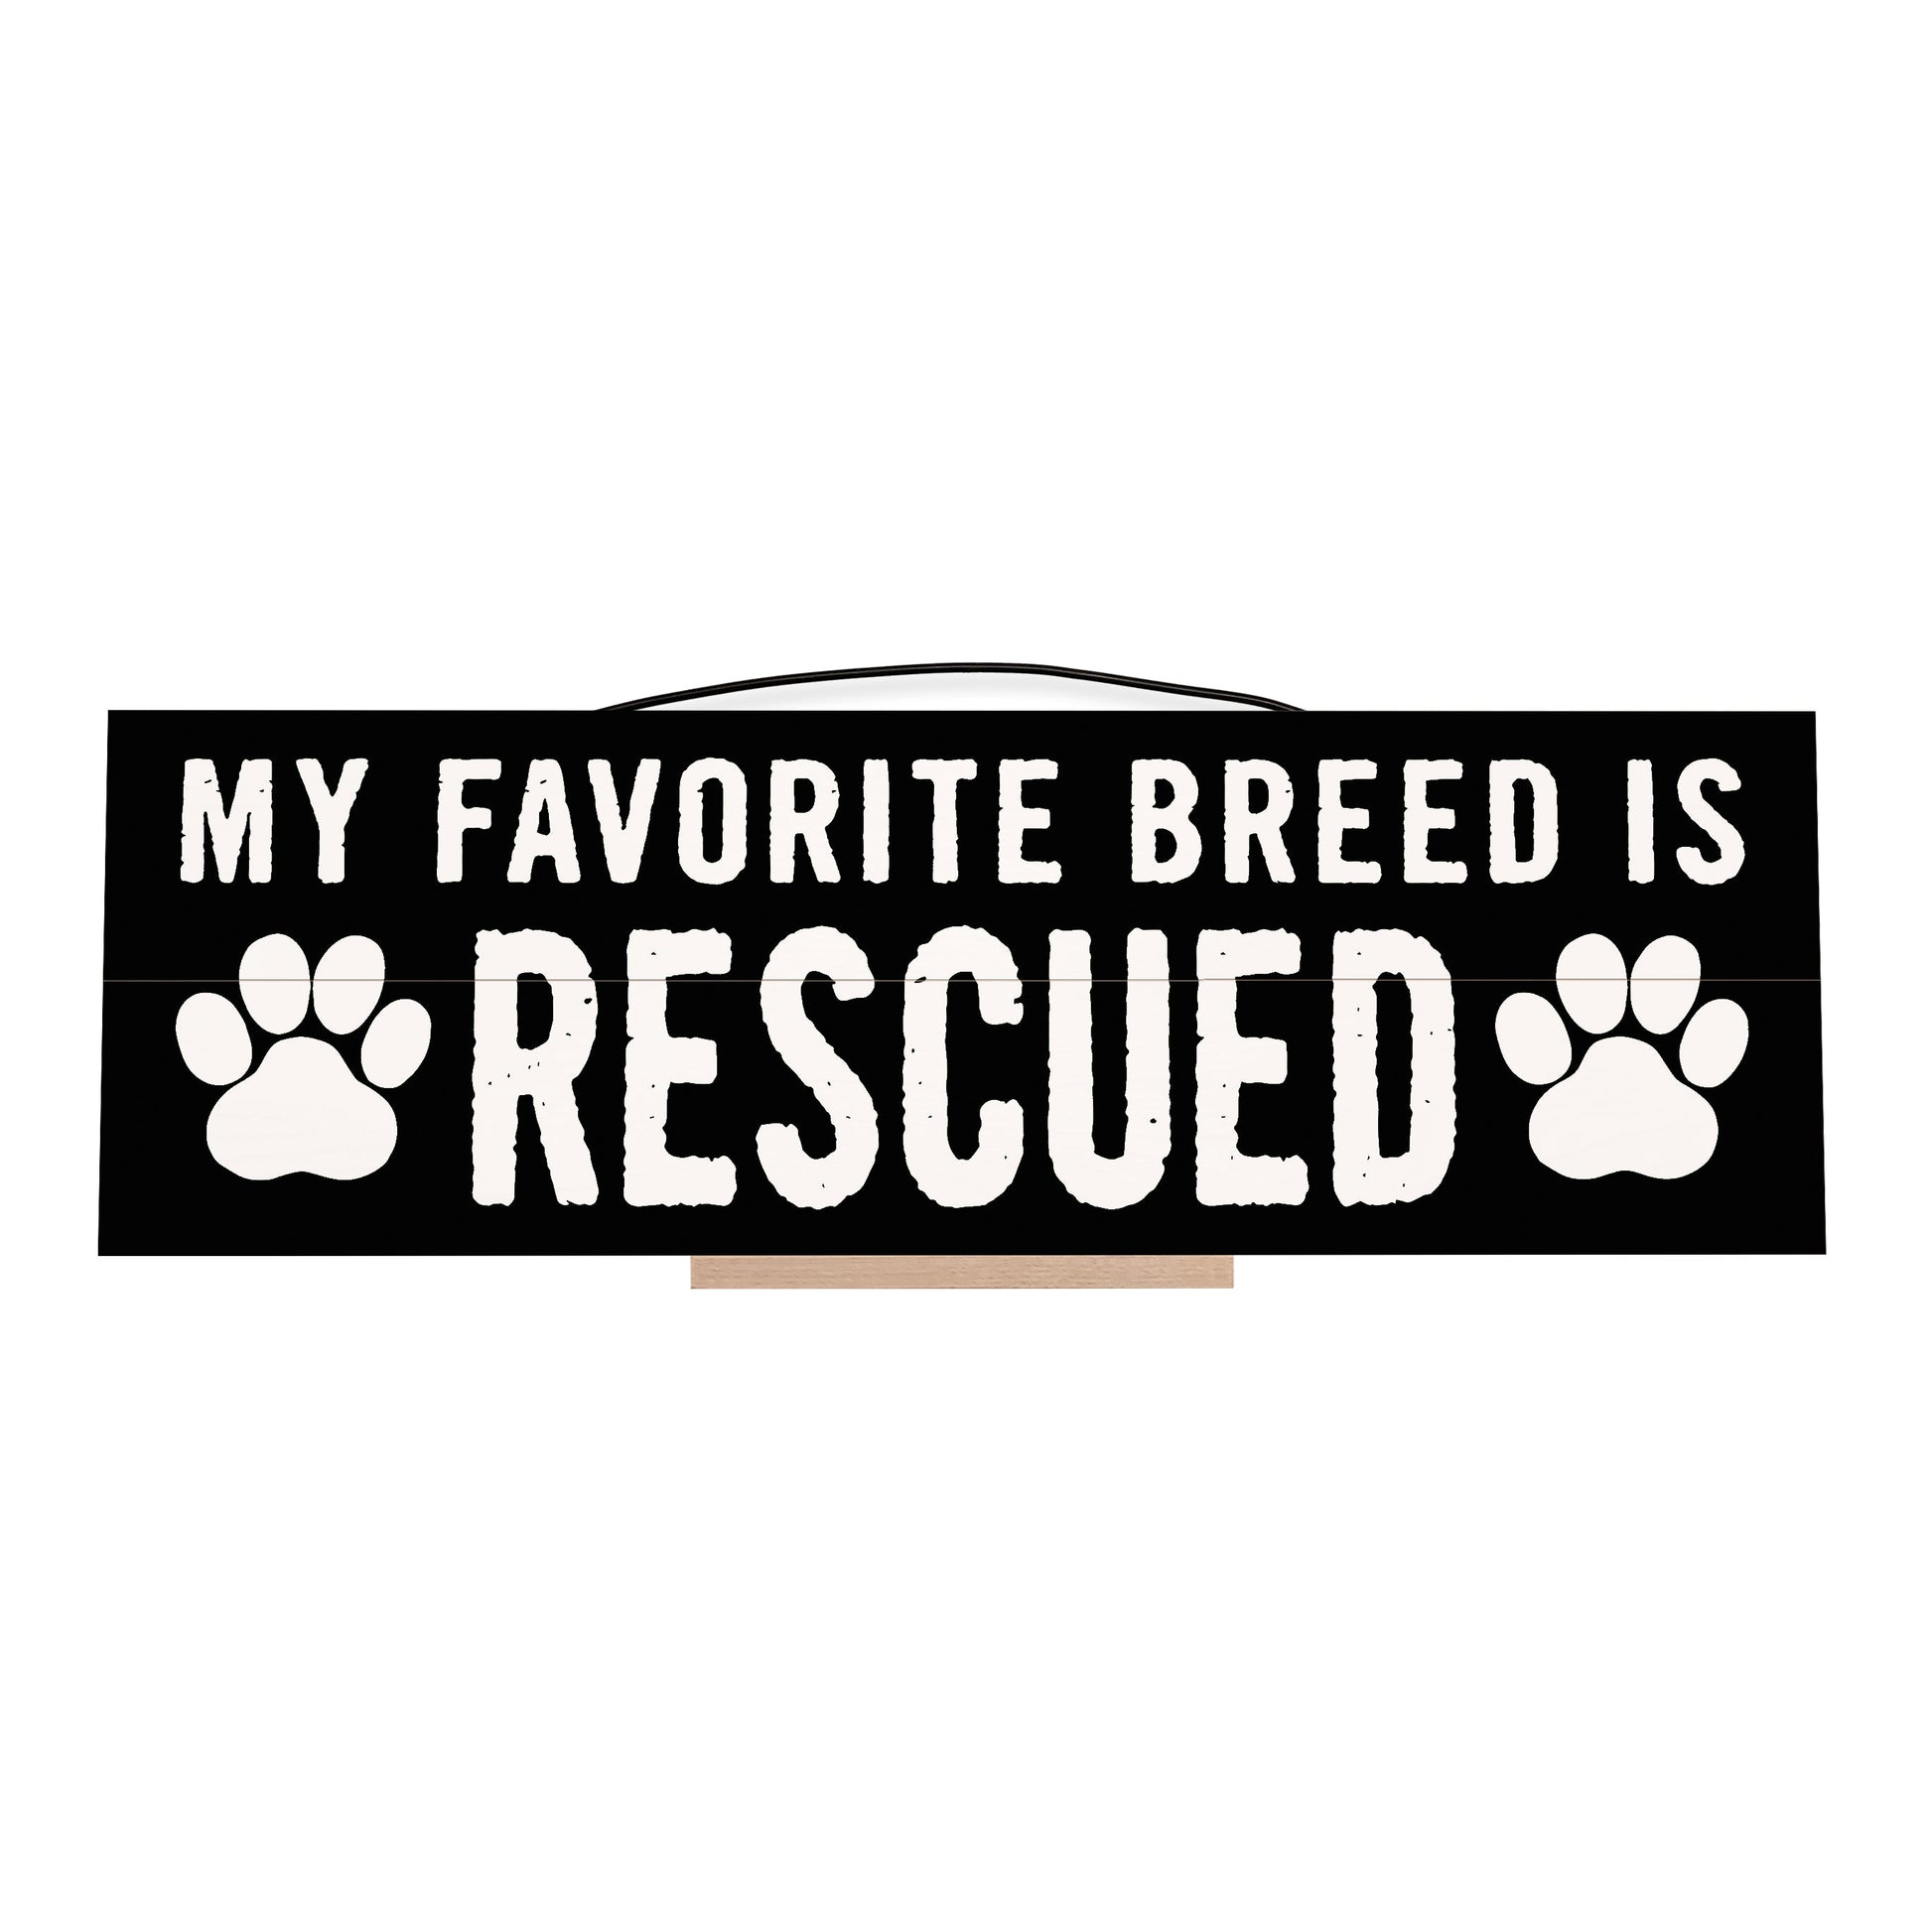 My Favorite Breed is Rescued.